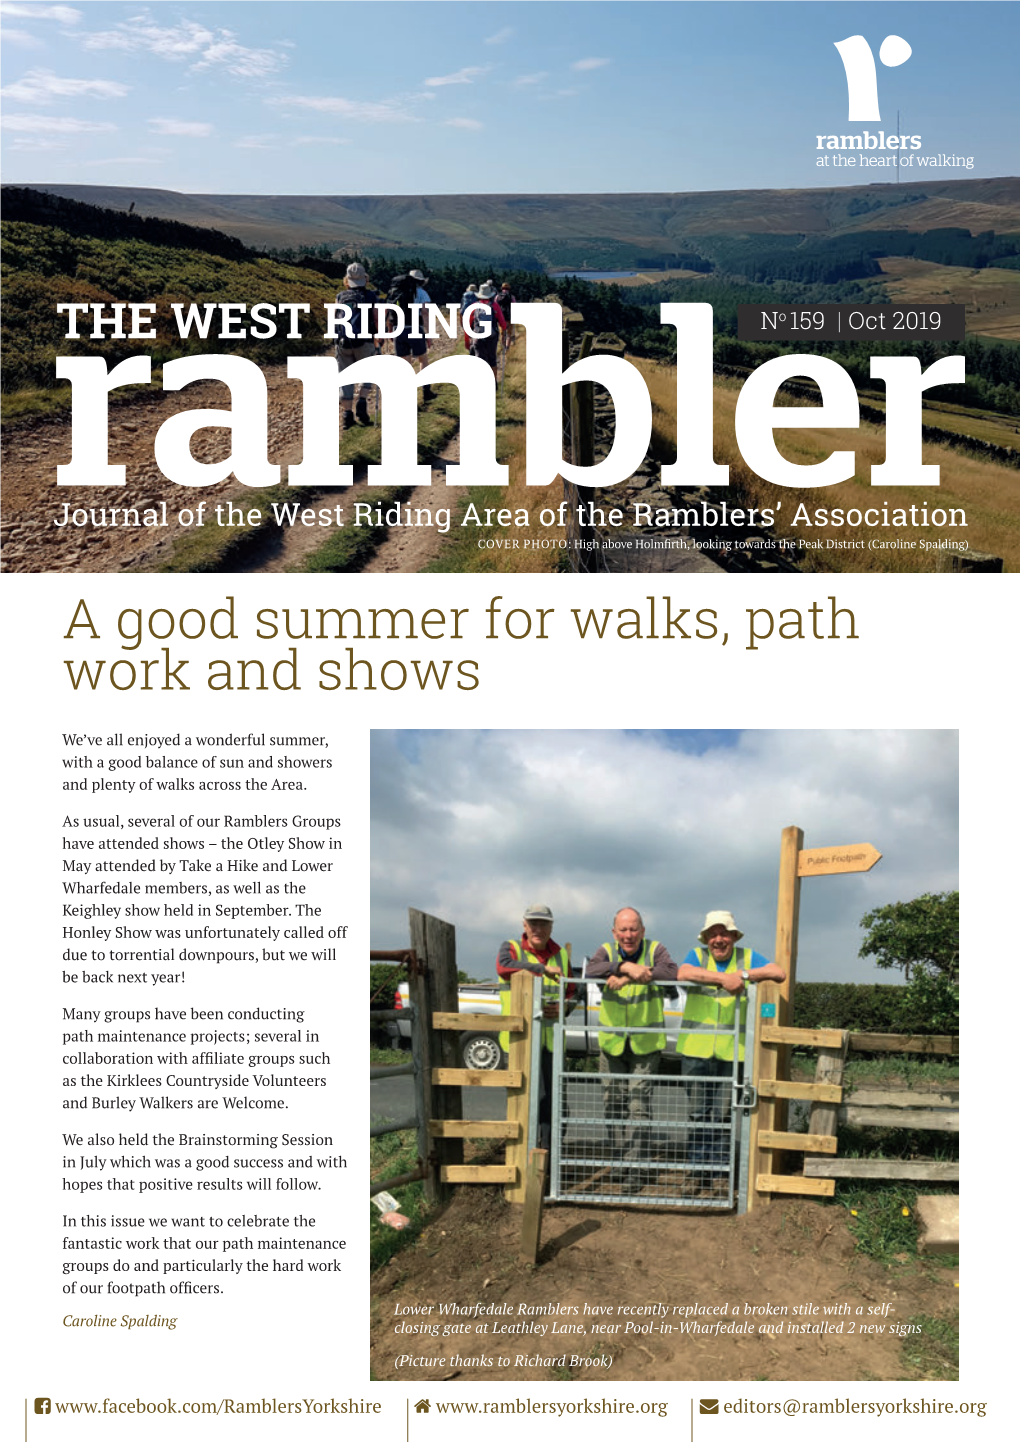 A Good Summer for Walks, Path Work and Shows